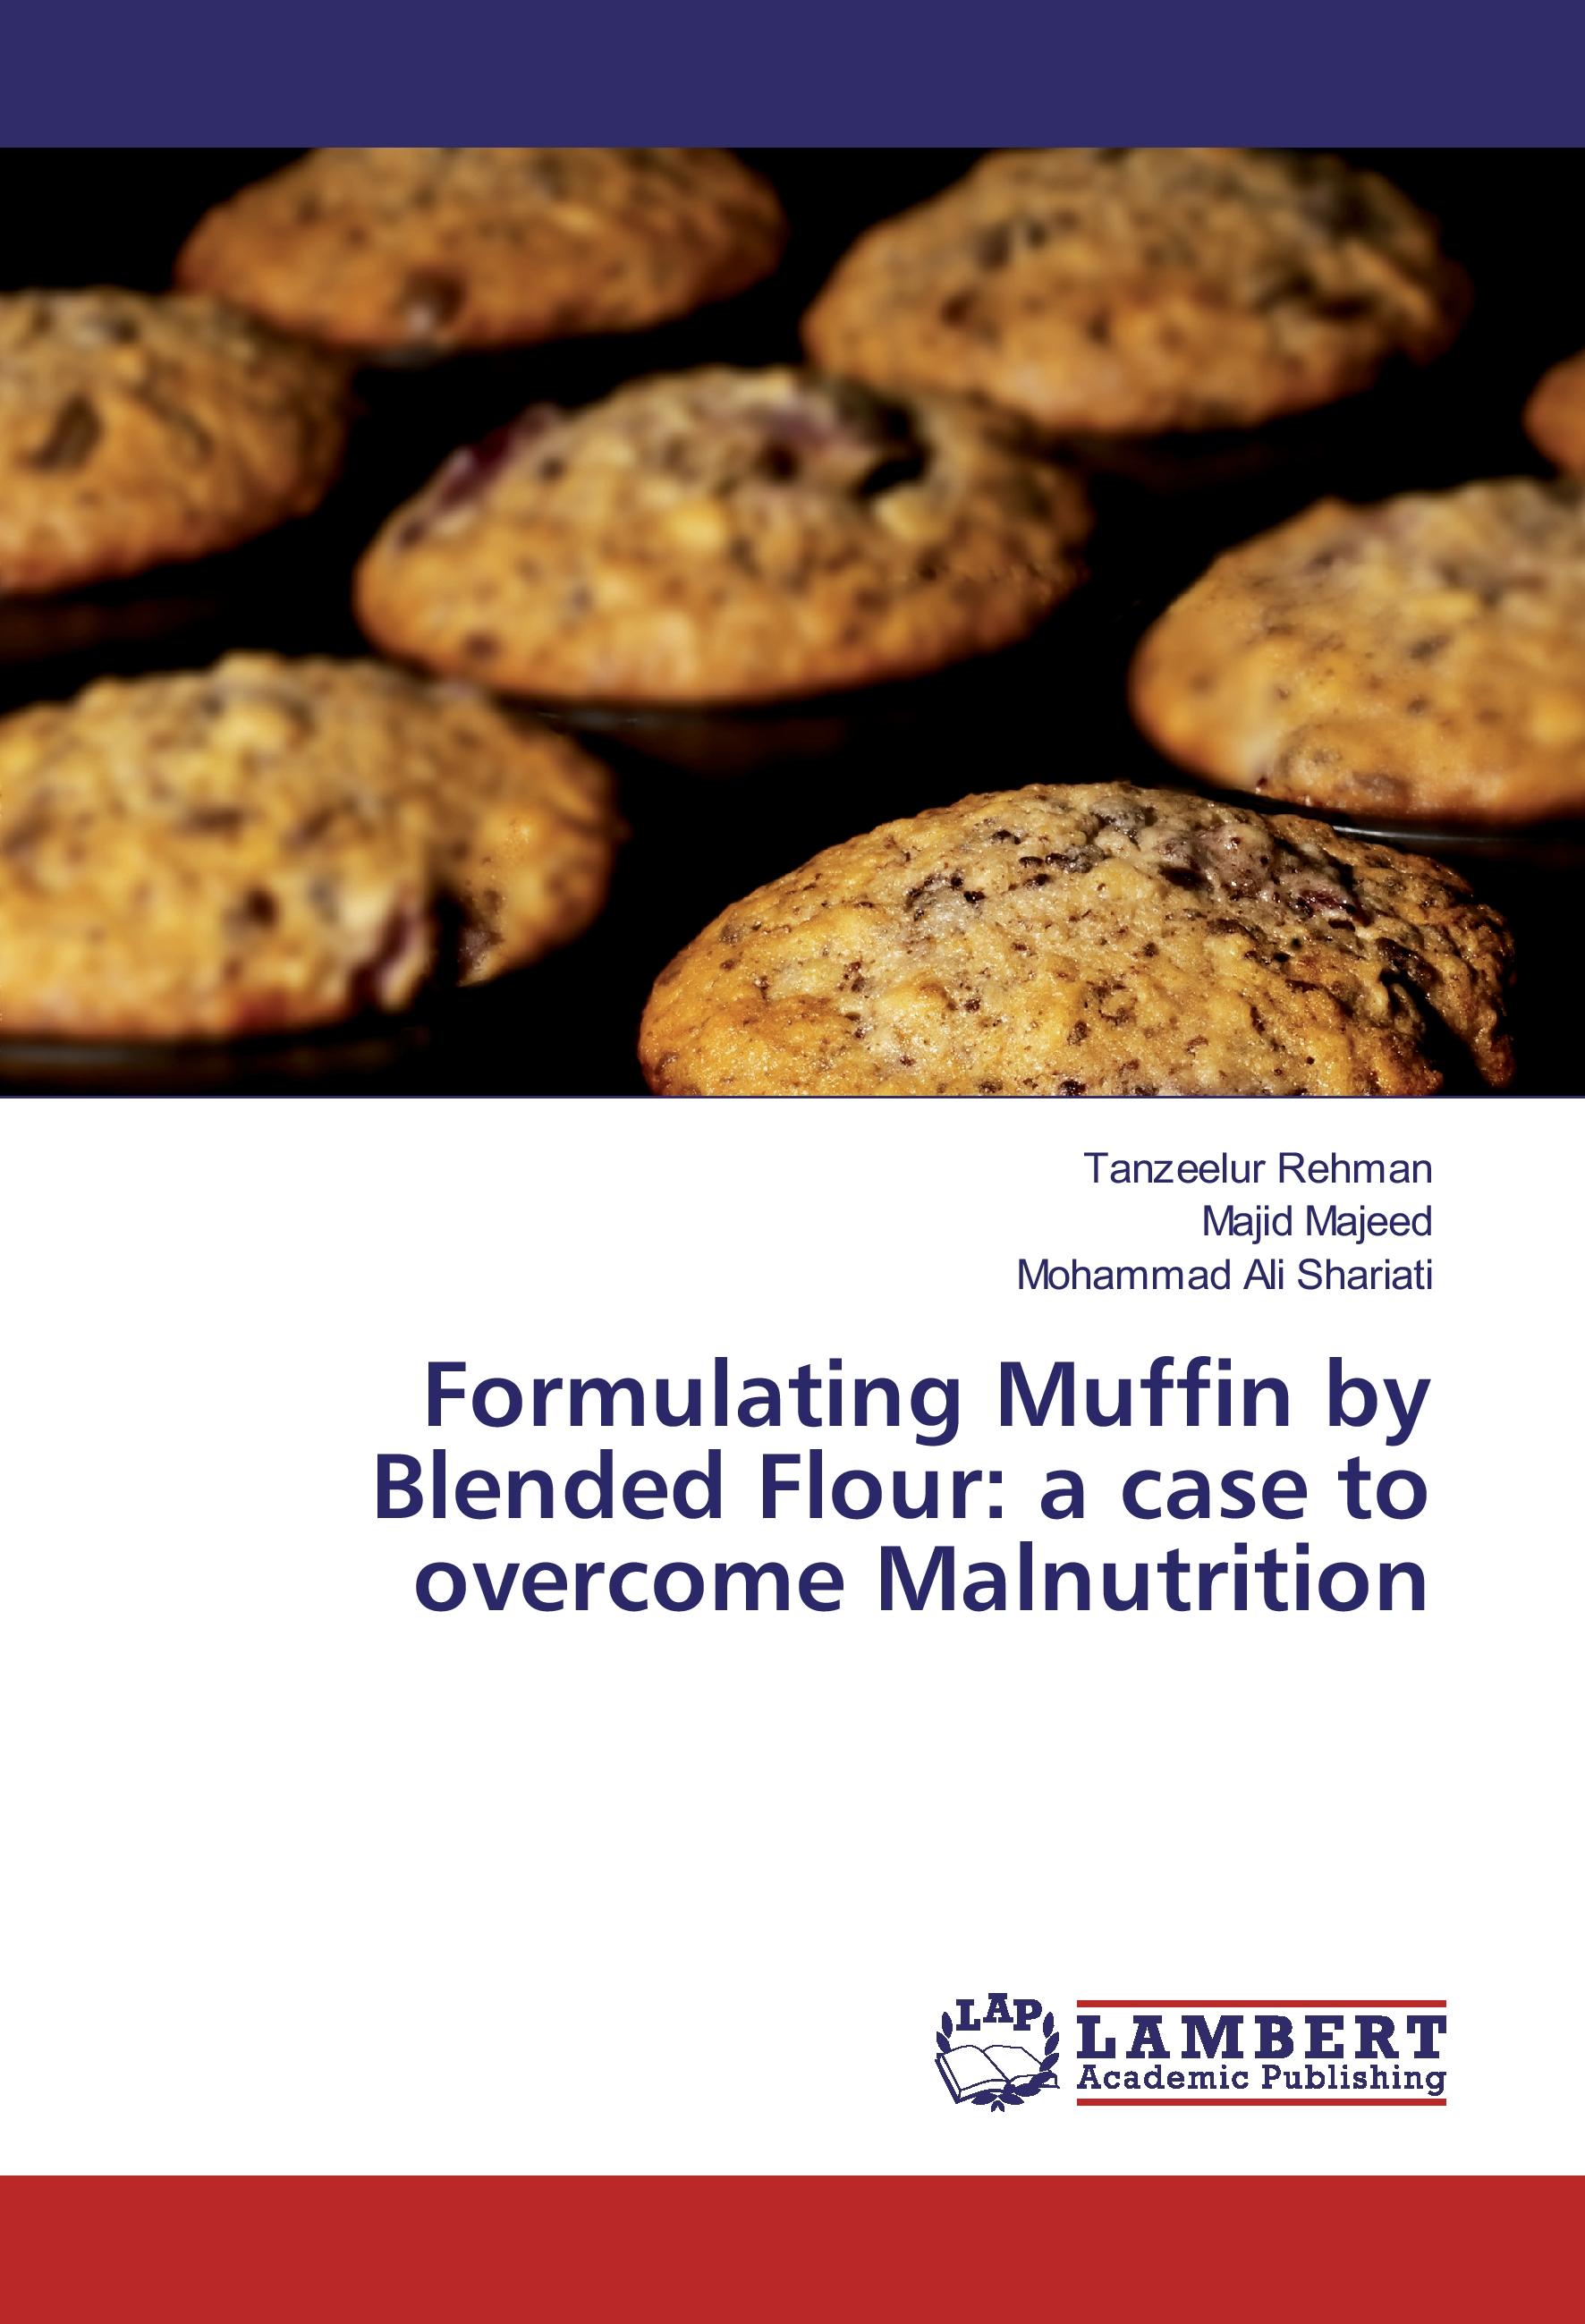 Formulating Muffin by Blended Flour: a case to overcome Malnutrition - Tanzeelur Rehman Majid Majeed Mohammad Ali Shariati